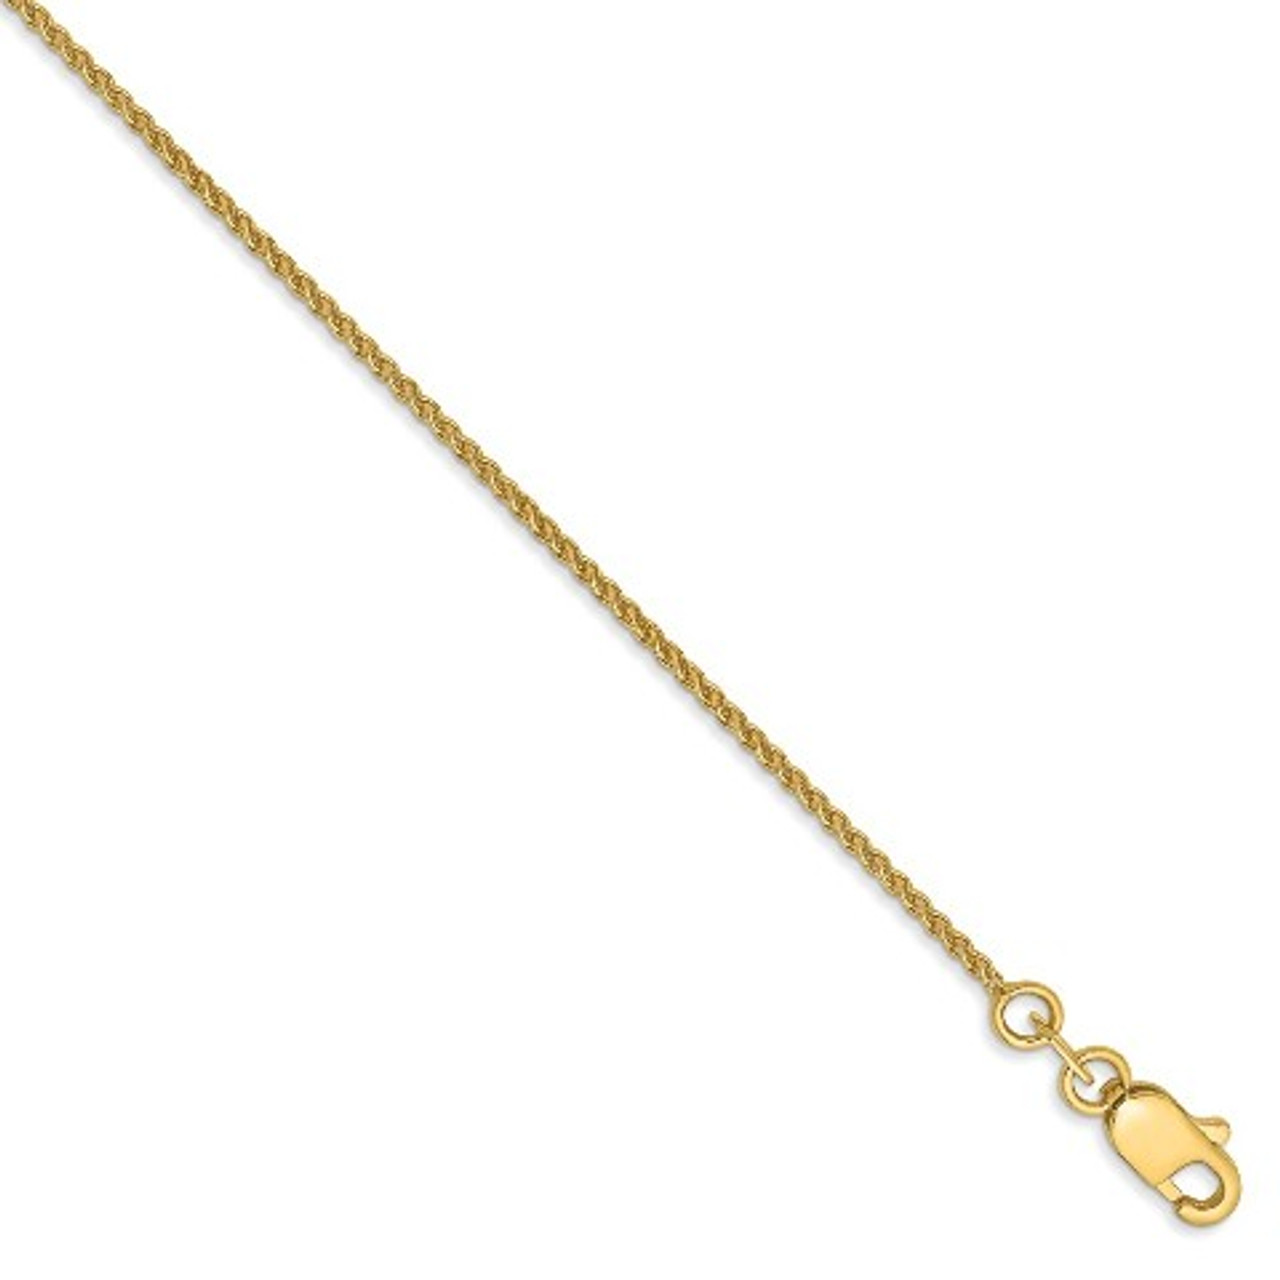 Spiga Chain Necklace | Gold Chain | PureJewels UK